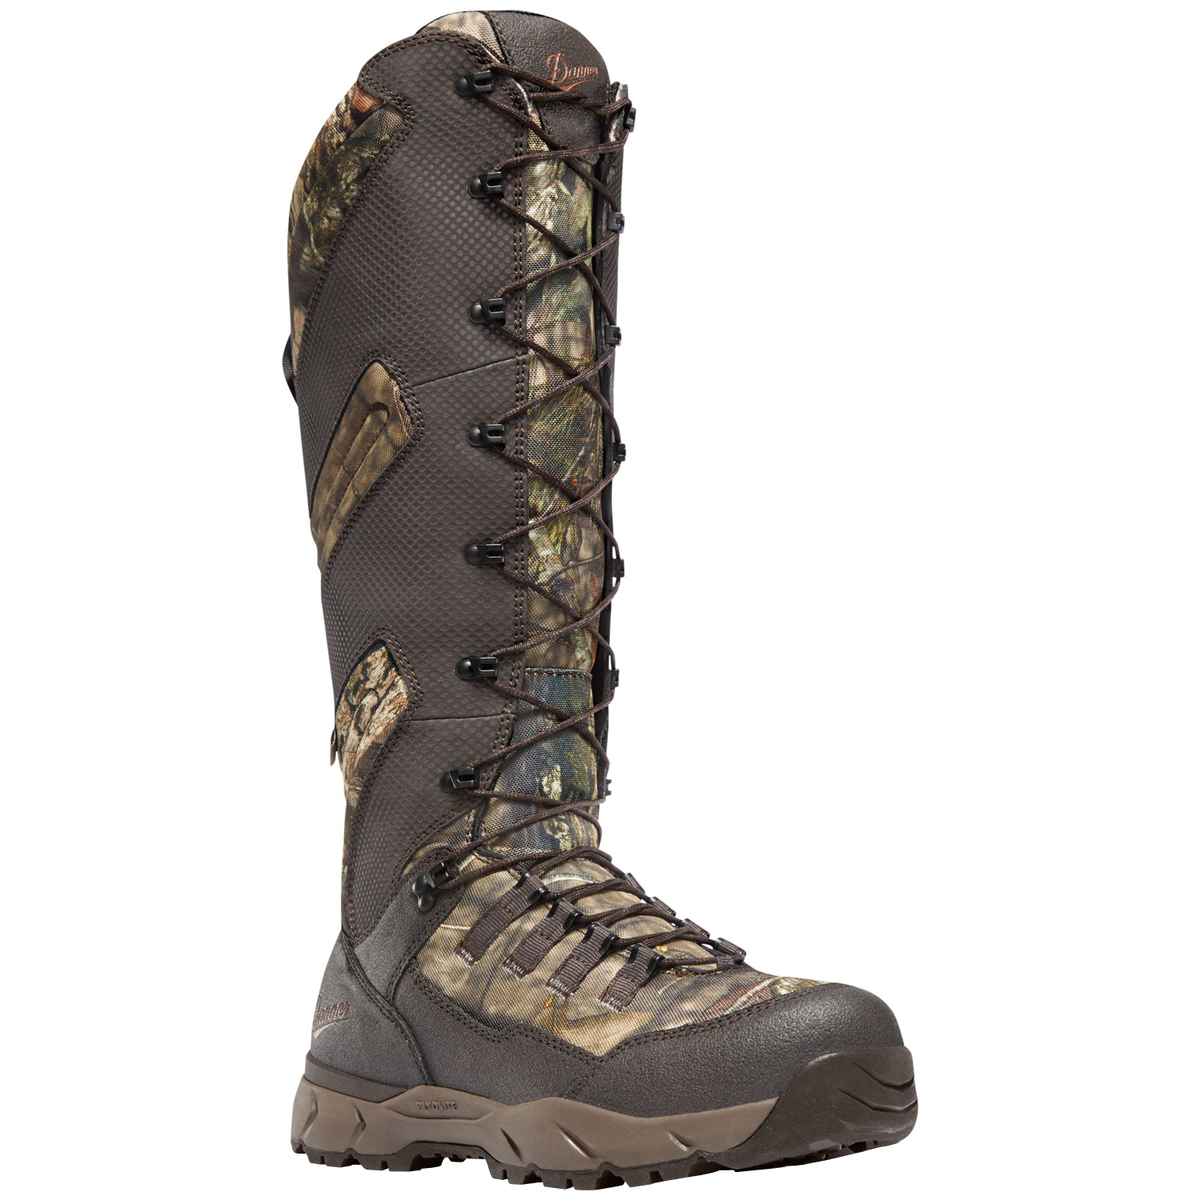 Danner Vital Uninsulated Waterproof Snakeboots - Mossy Oak Up Country - Size 8.5 D - Mossy Oak Country 8.5 | Sportsman's Warehouse